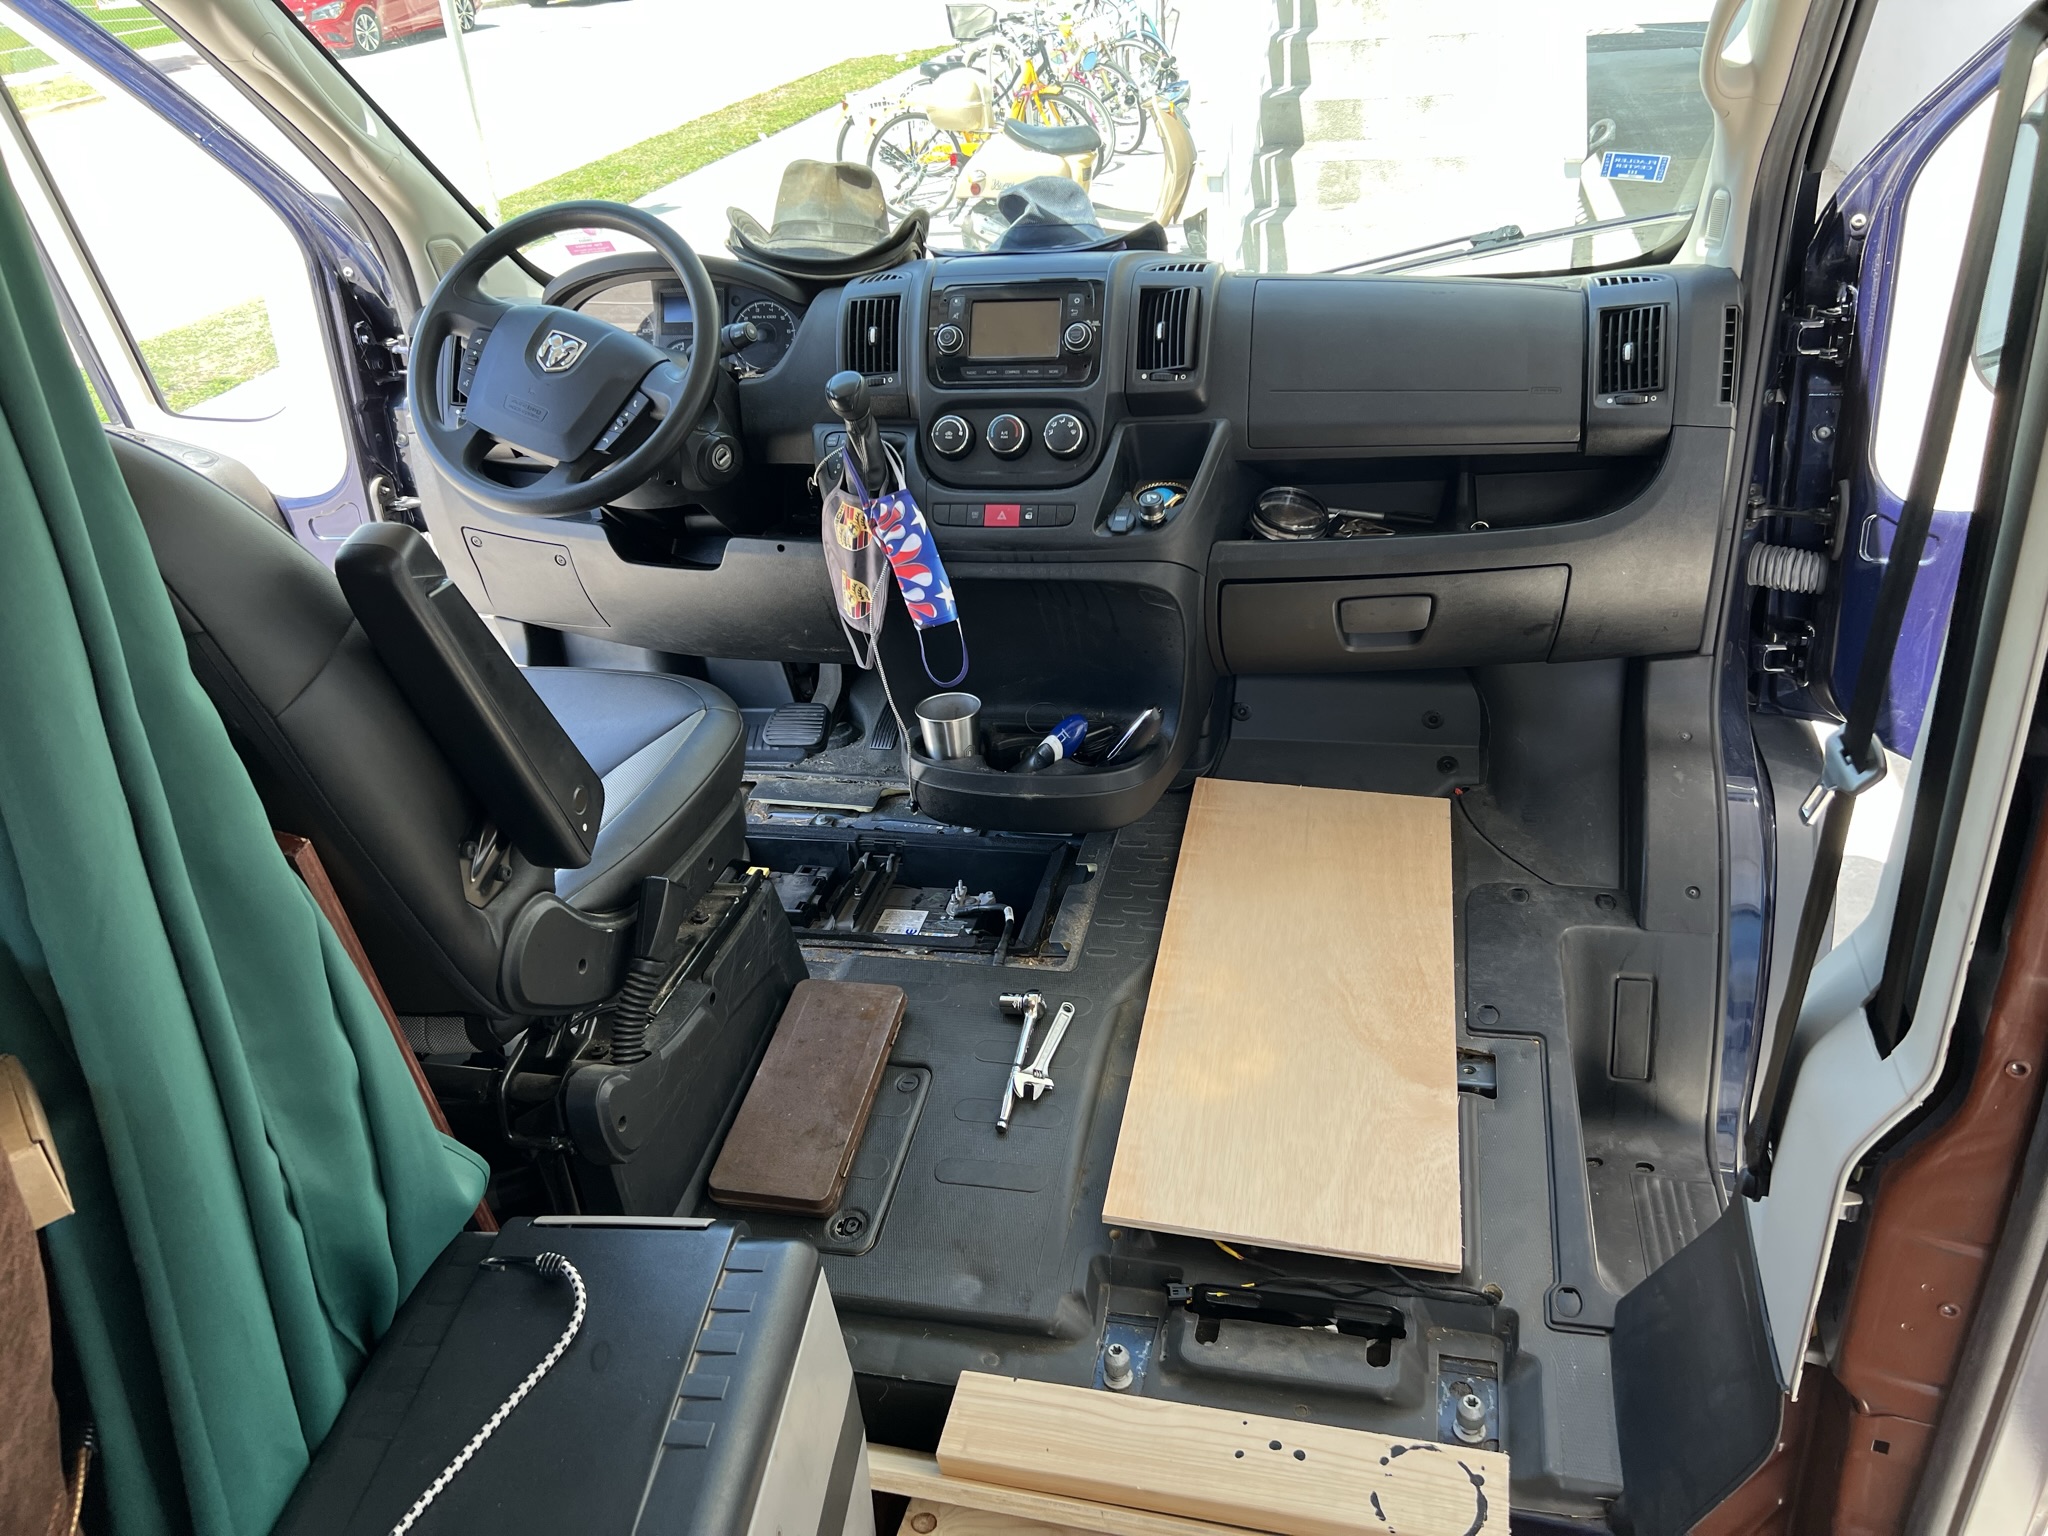 The inside of a car
Description automatically generated with medium confidence